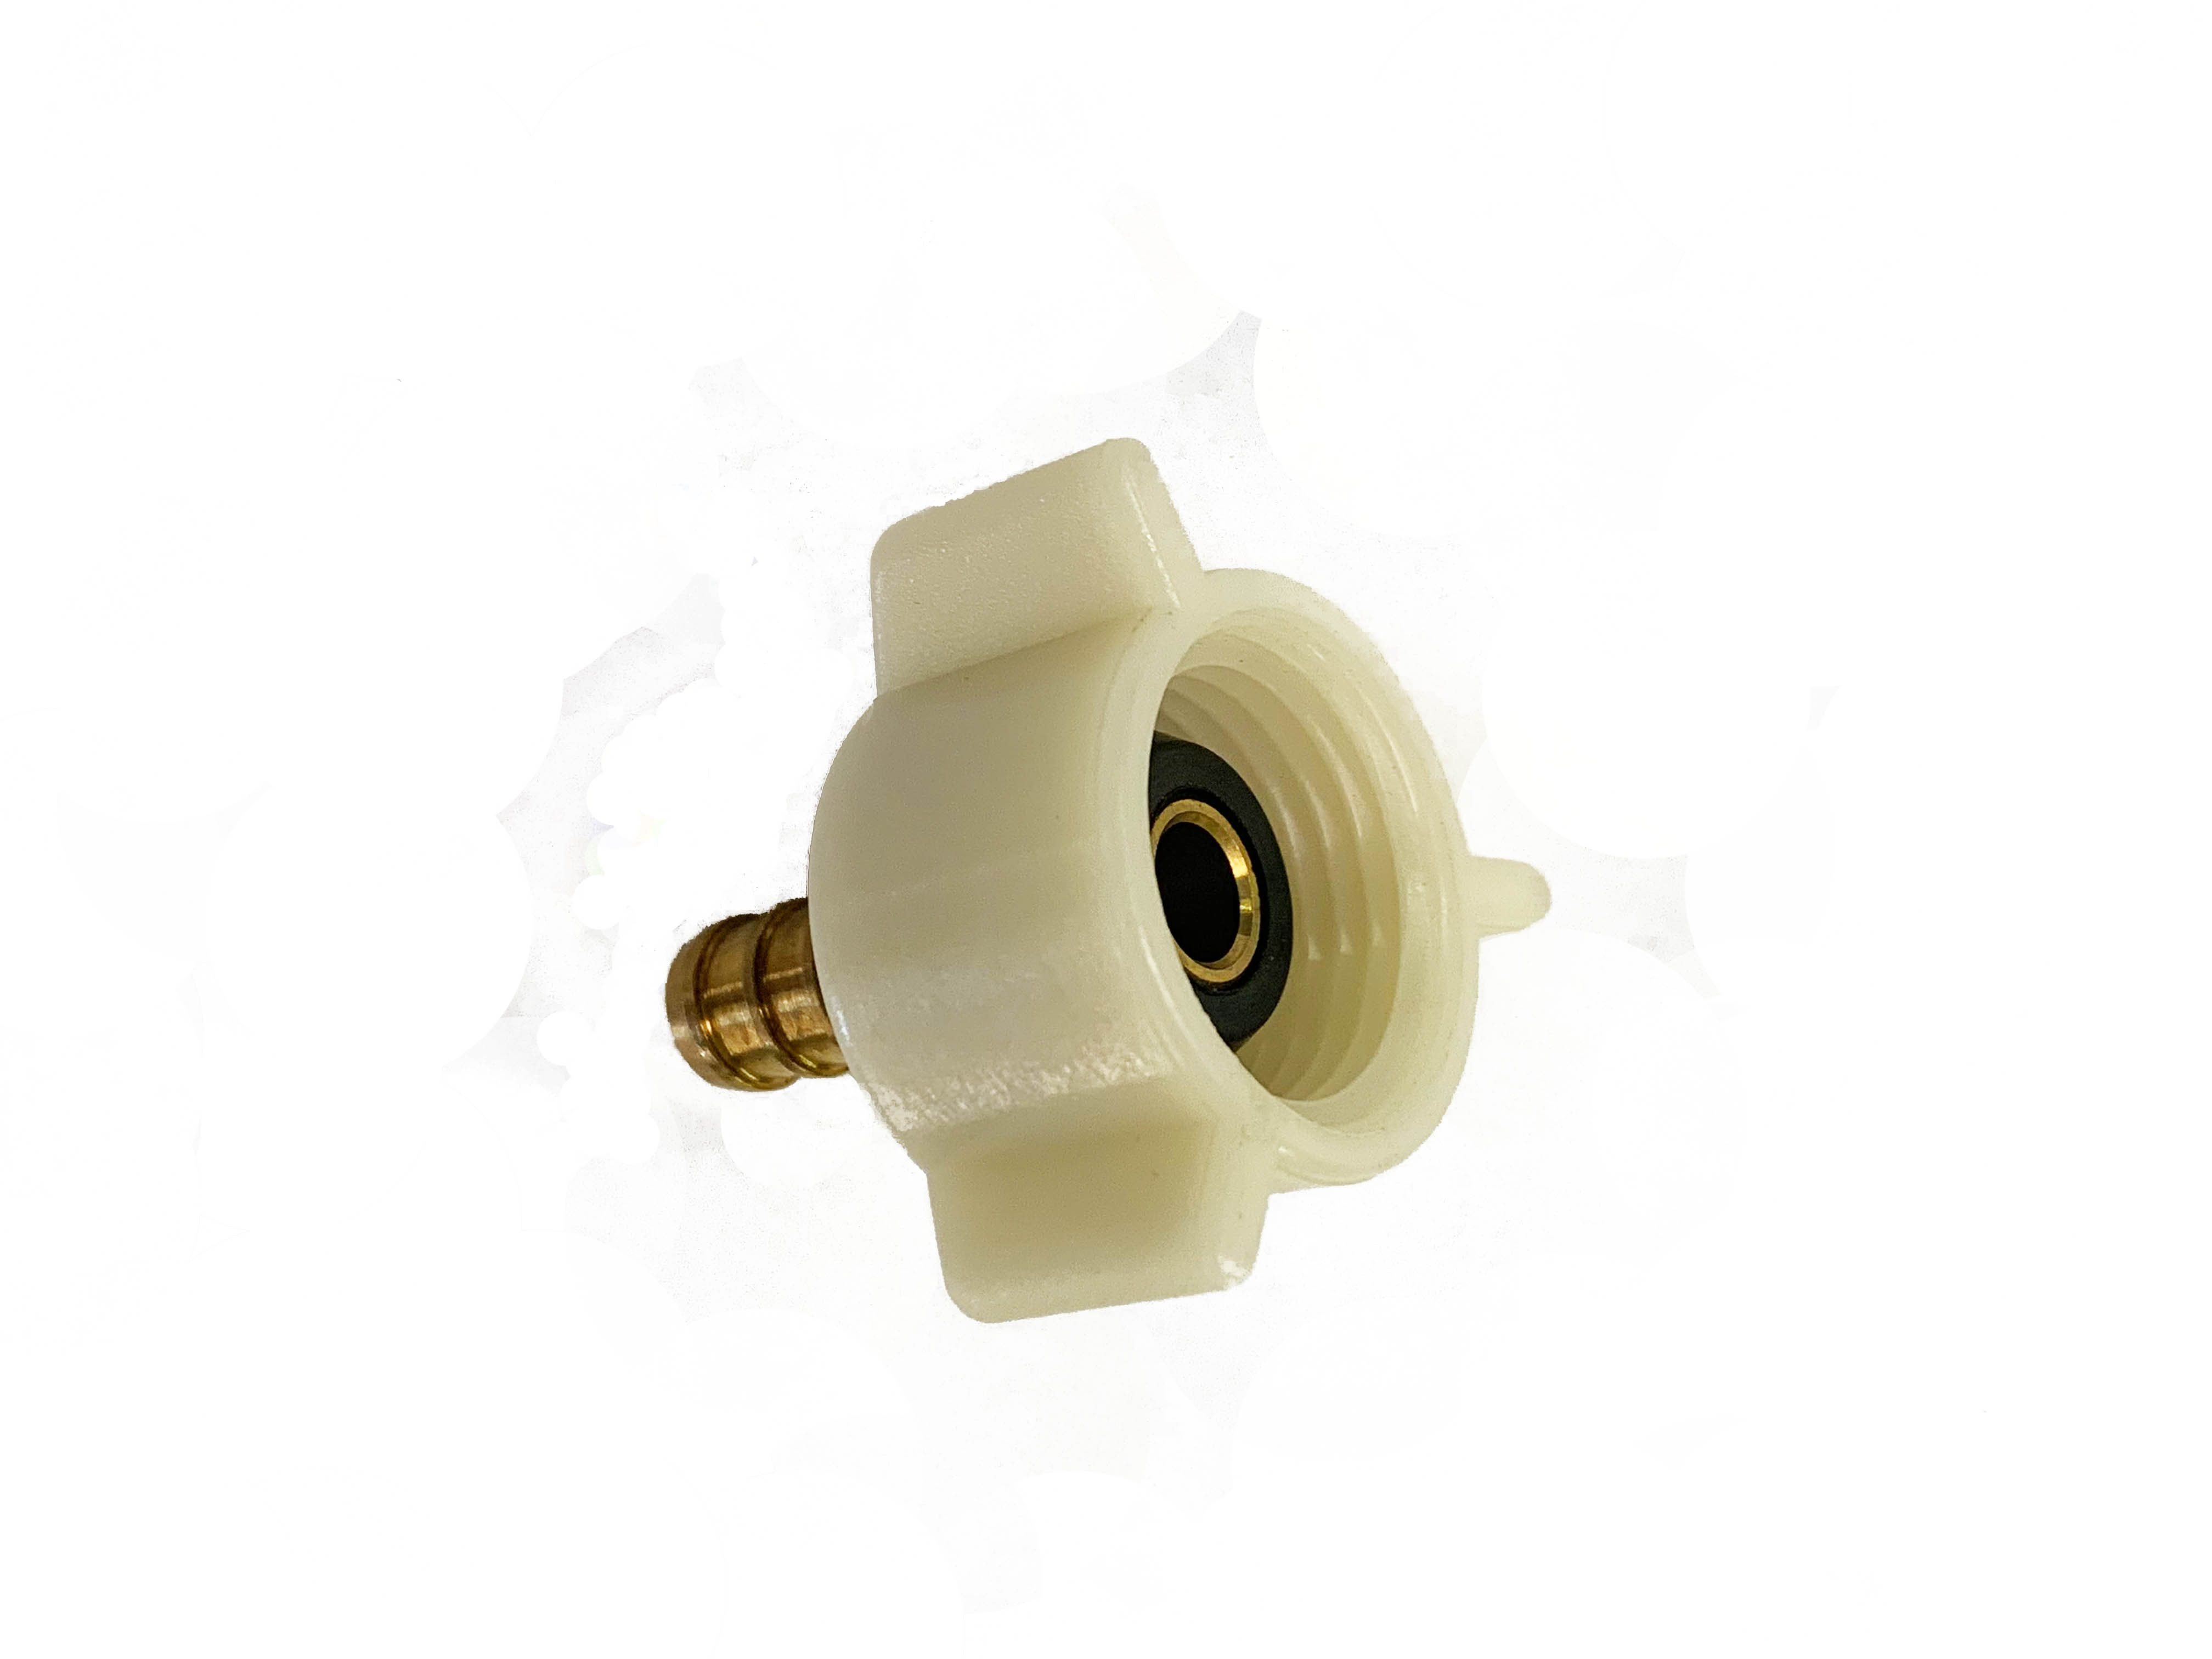 Buy Online 3 8 Pex X 1 2 Swivel Connector American Mobile Home